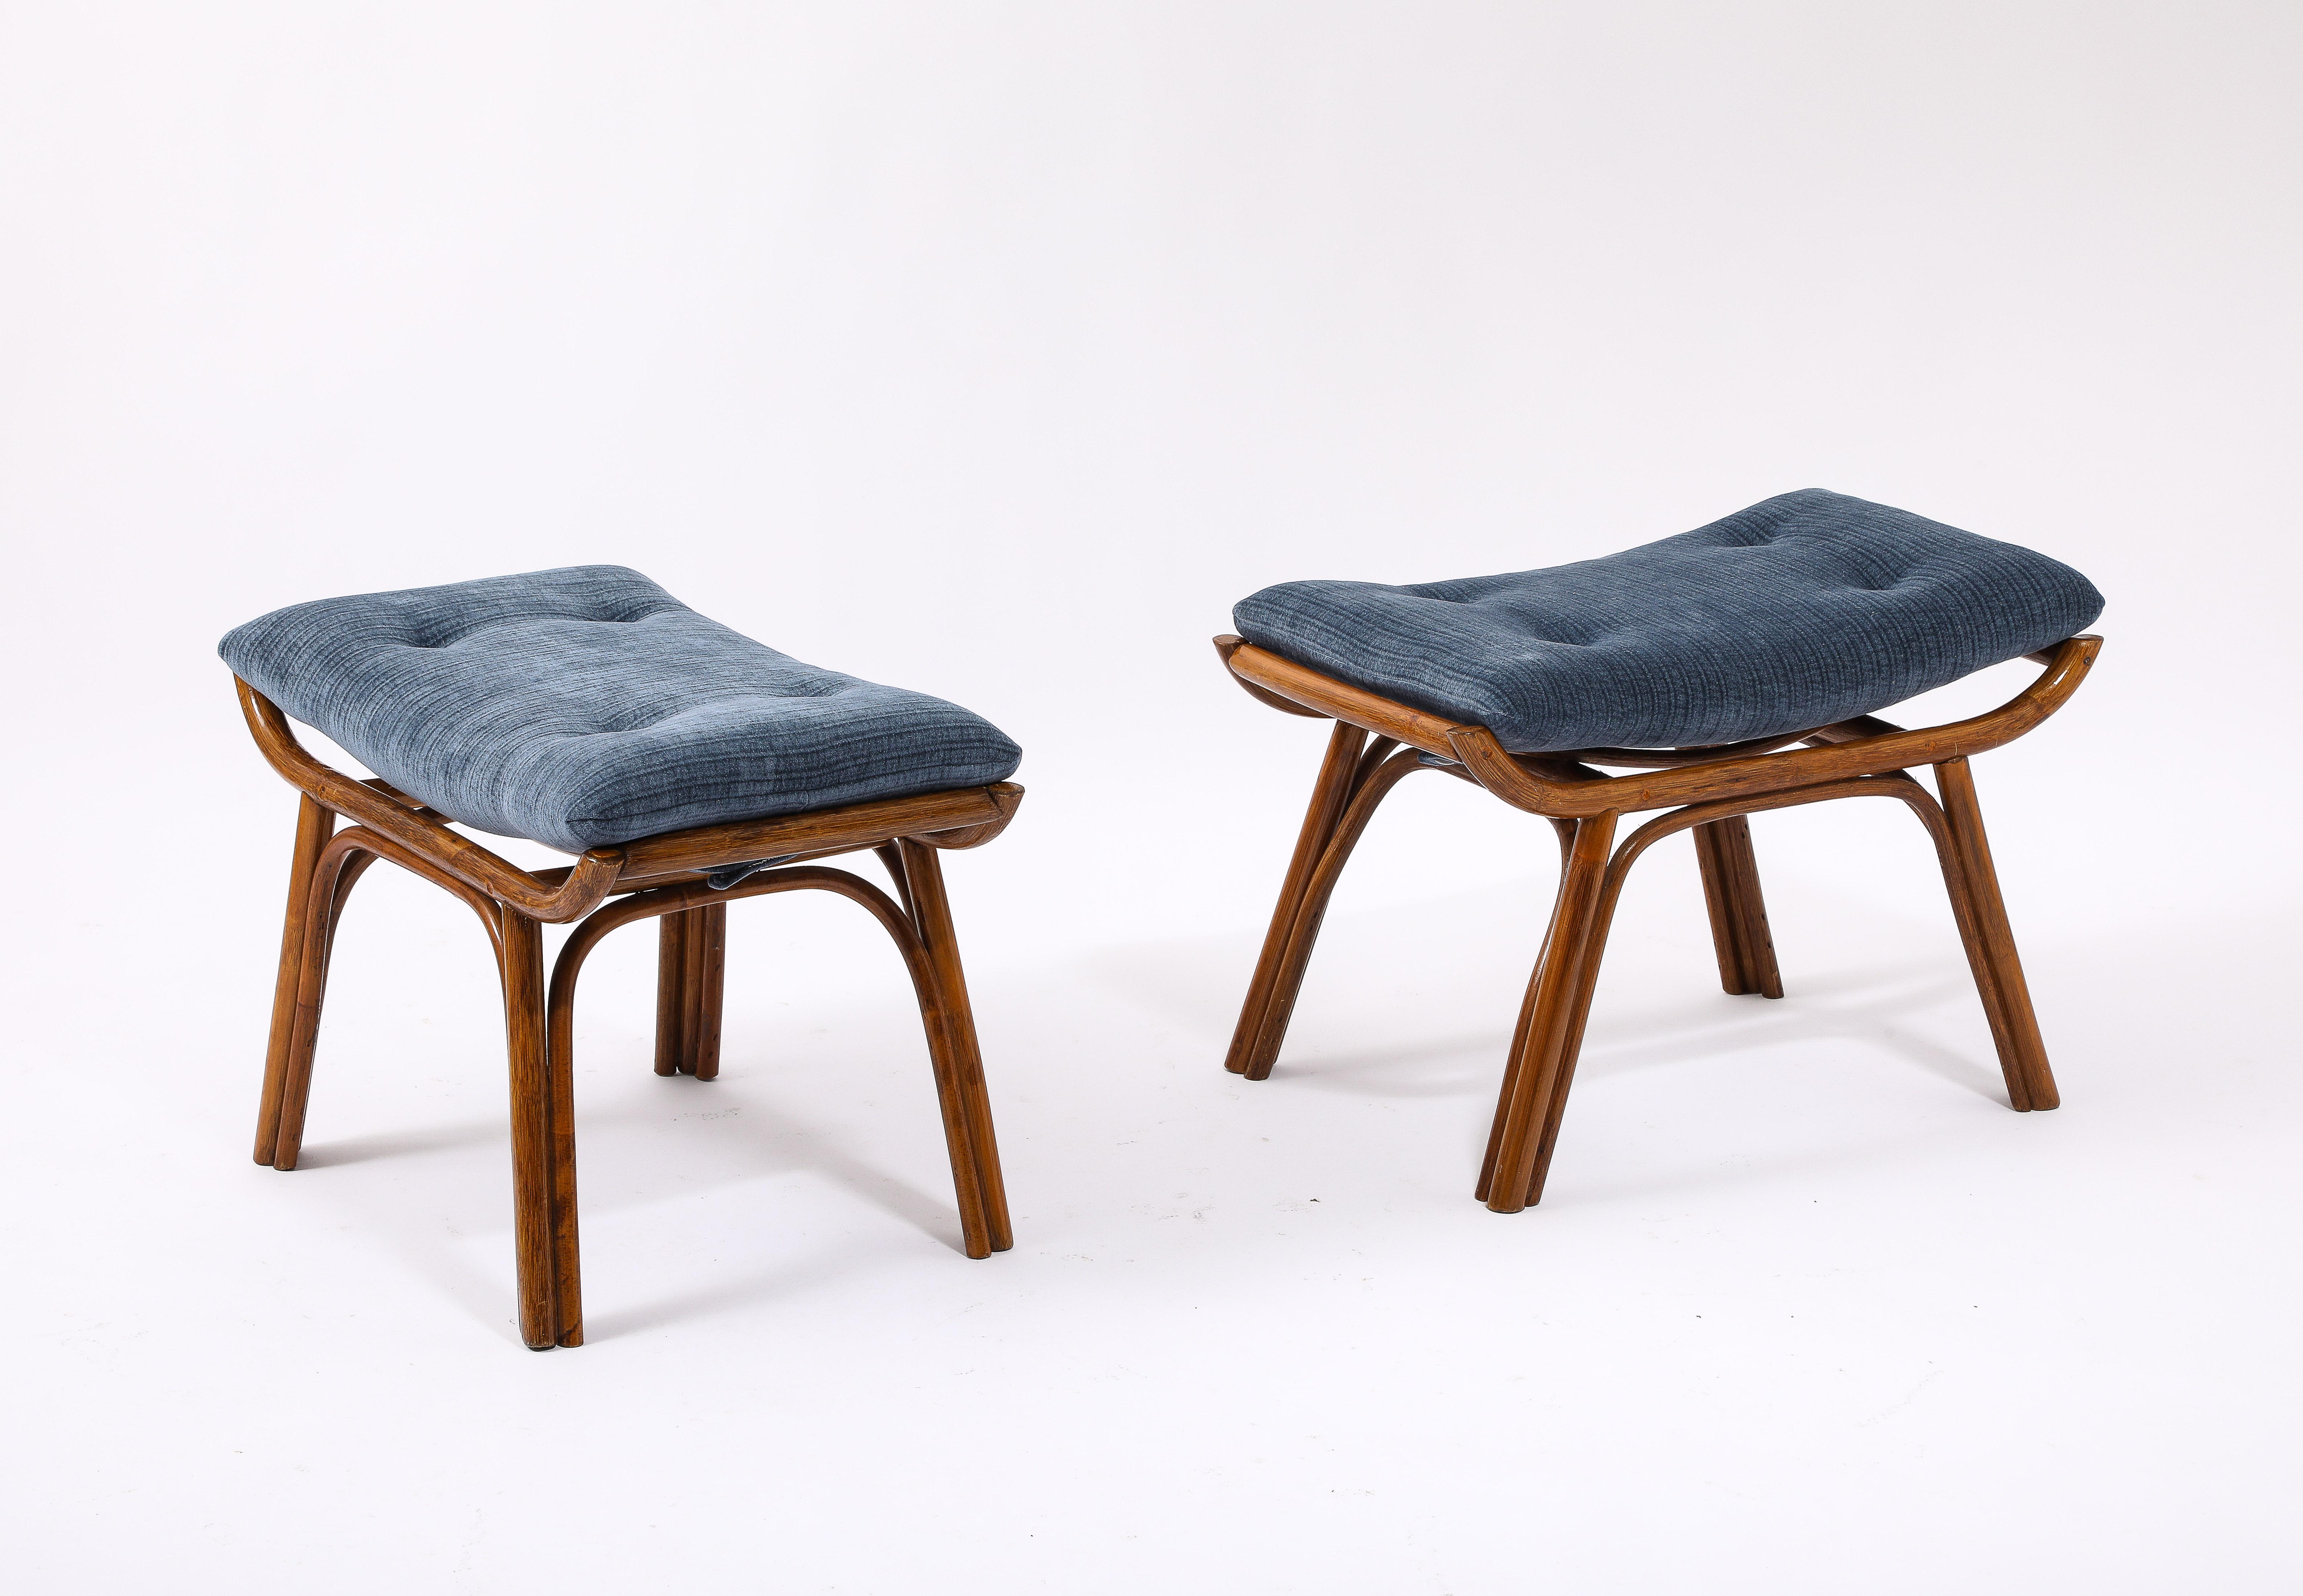 20th Century Curved Bamboo Stools in Blue Mohair, France 1950's For Sale